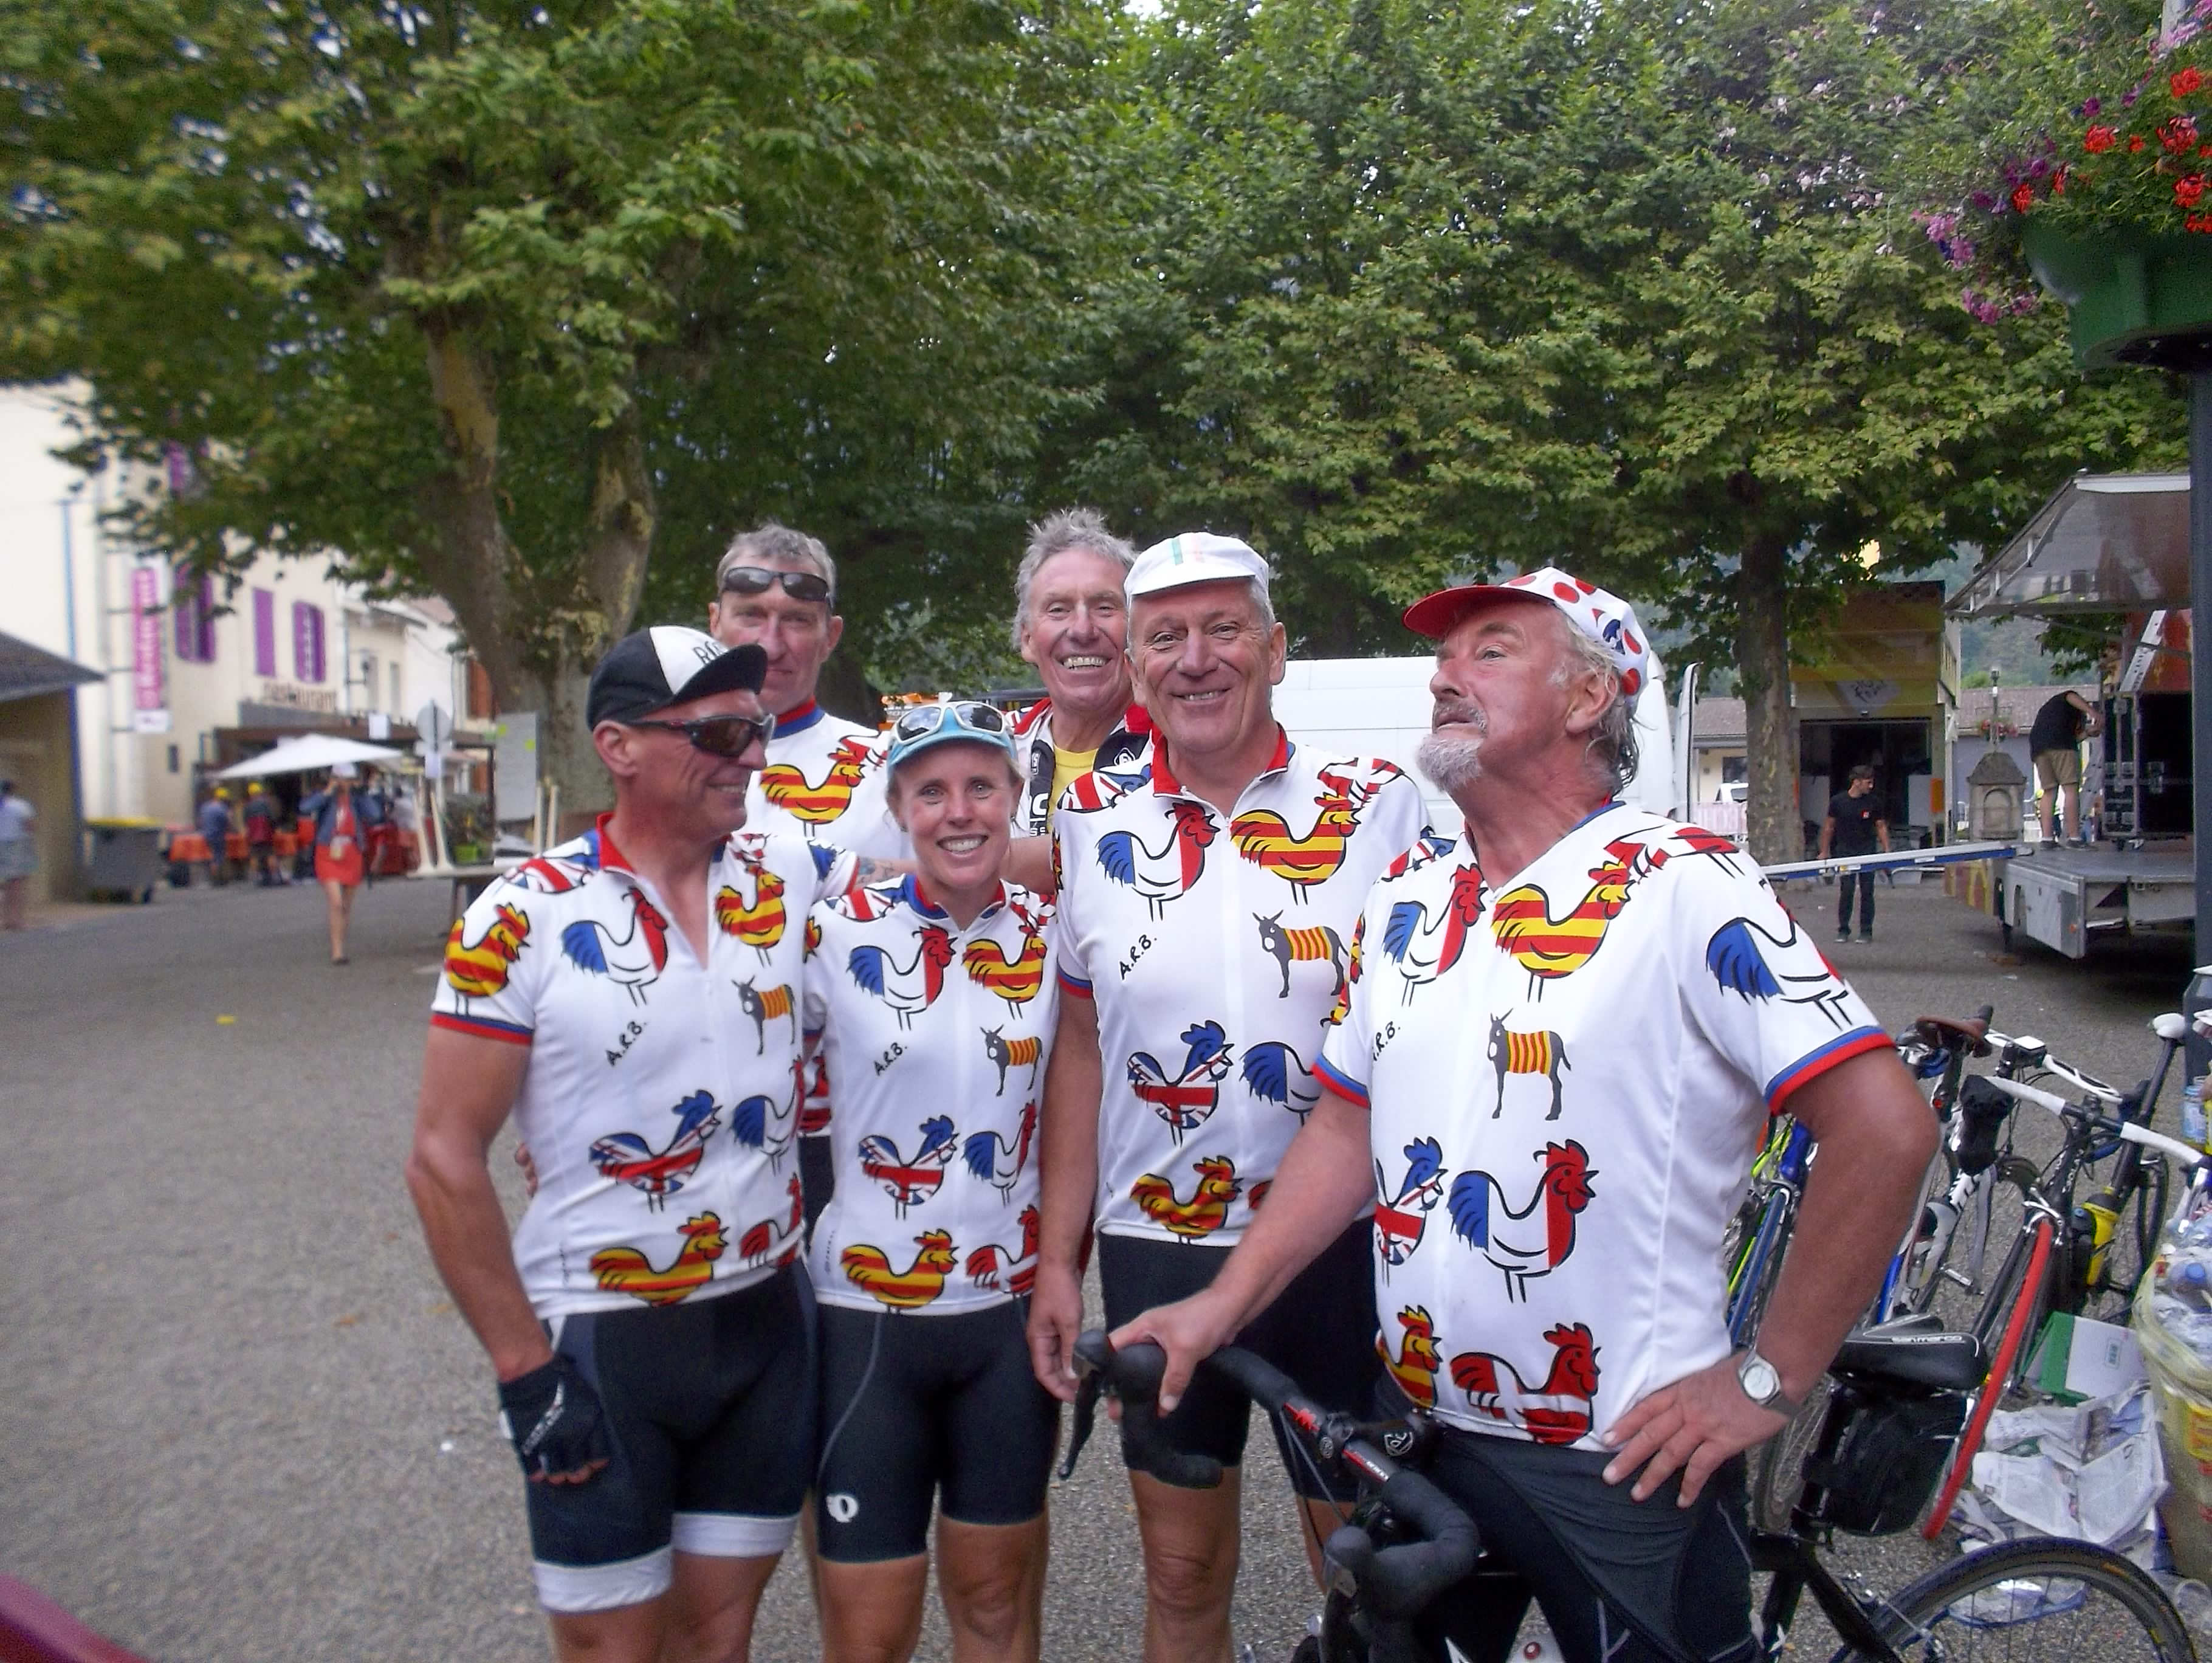 Axat Roast Beefs cycling group in France